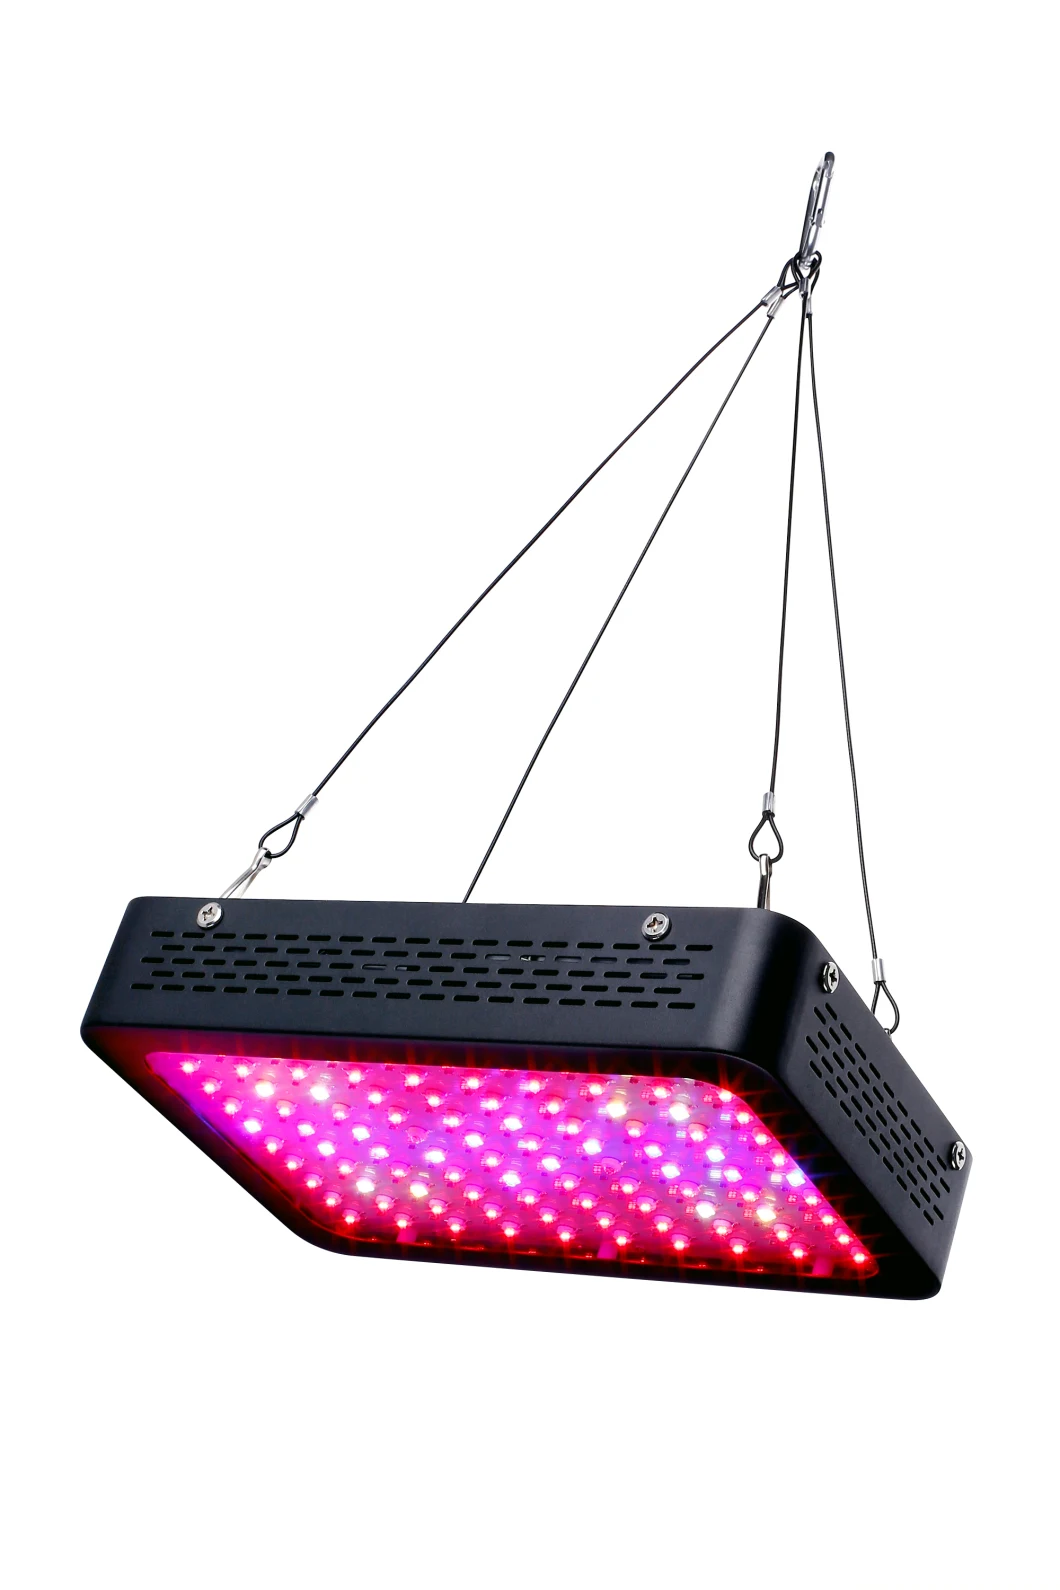 Weixinli Cheapest Veg/Bloom Switches 1000W LED Grow Light with Full Spectrum 